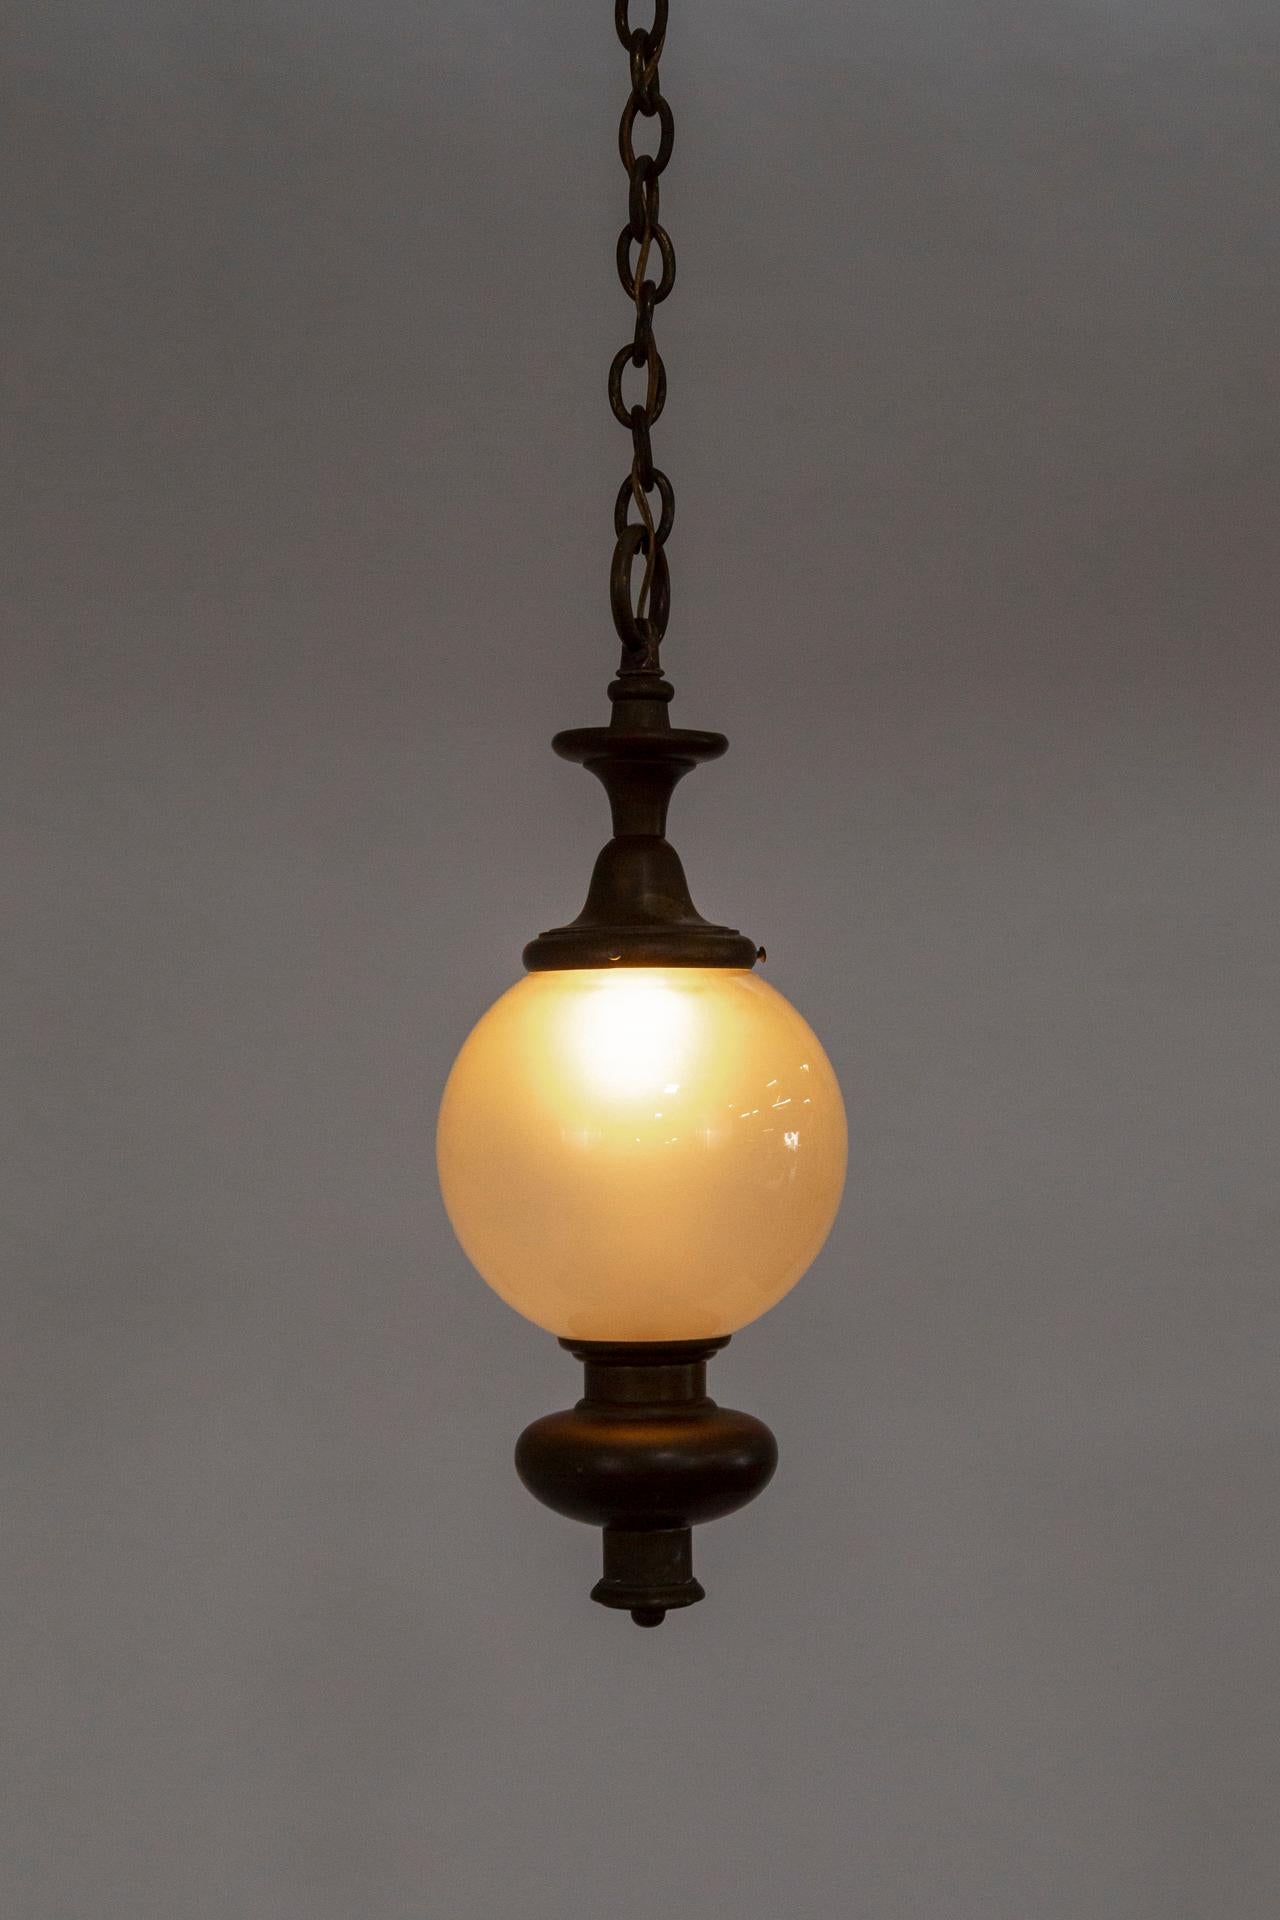 An early 20th-century pendant light with a frosted glass, globe shade adorned with a large, tiered, cylindrical, brass bottom finial and cap; hanging from a long chain with a matching canopy. The original blown glass shade gives off a lovely,